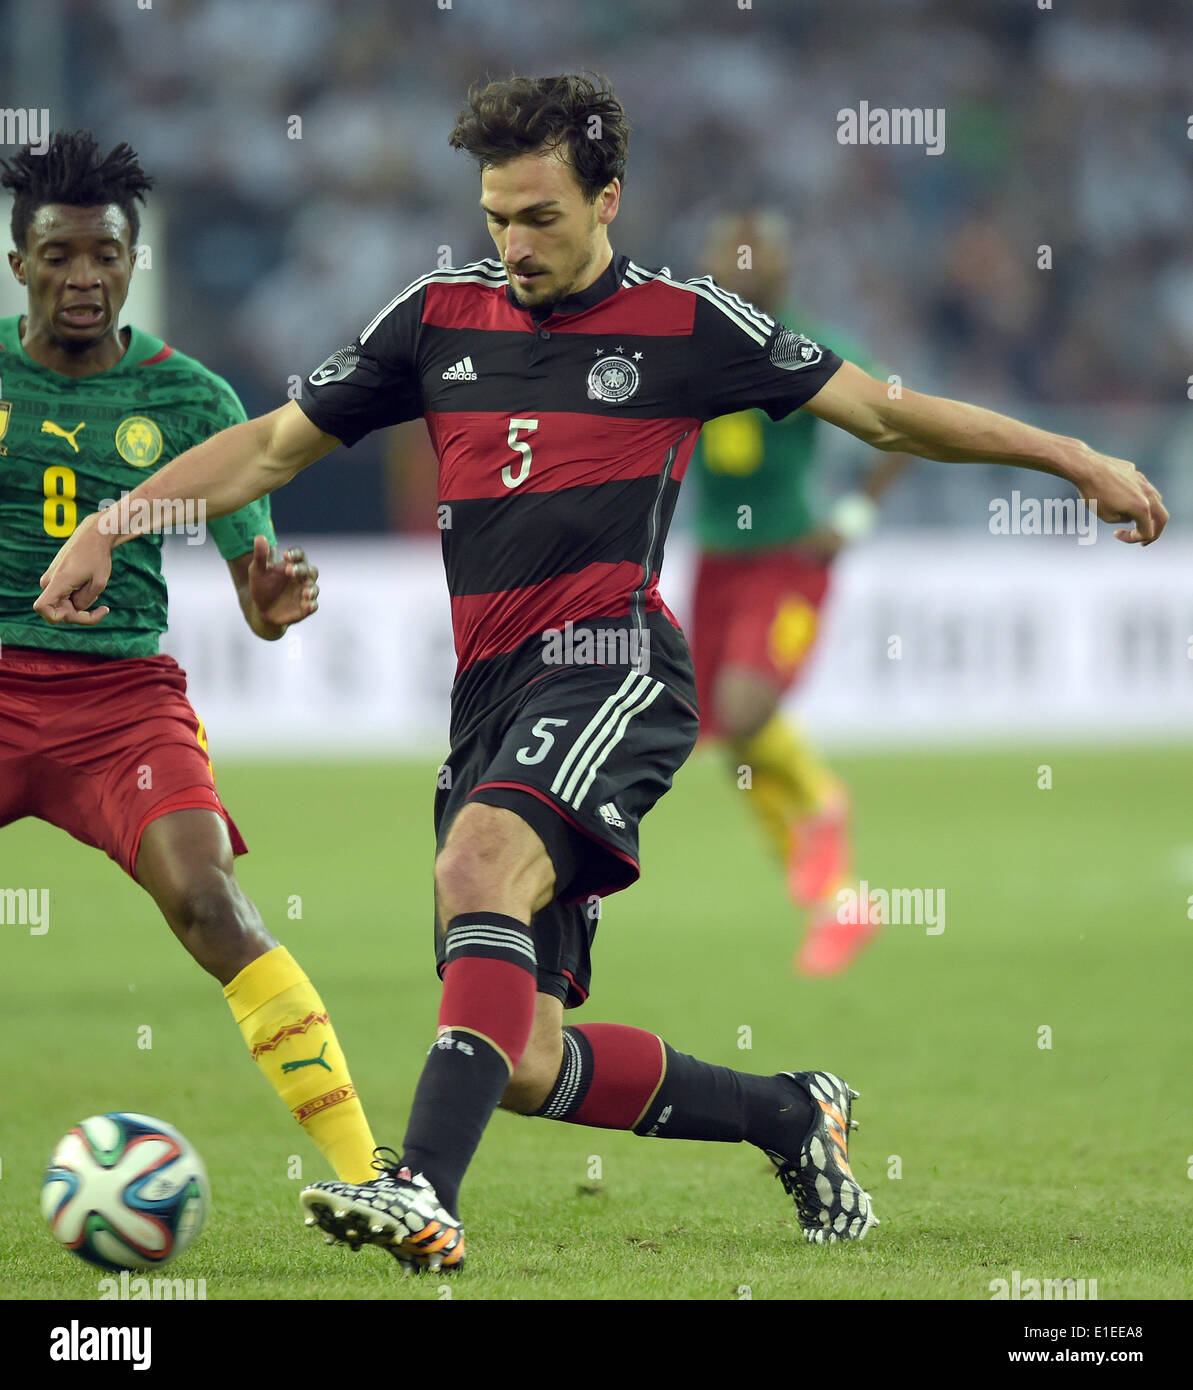 Moenchengladbach, Germany. 01st June, 2014. Germany's Mats Hummels in action against Cameroon's Benjamin Moukandjo during the friendly soccer match between Germany and Cameroon at the Borussia Park stadium in Moenchengladbach, Germany, 01 June 2014. Photo: Federico Gambarini/dpa/Alamy Live News Stock Photo